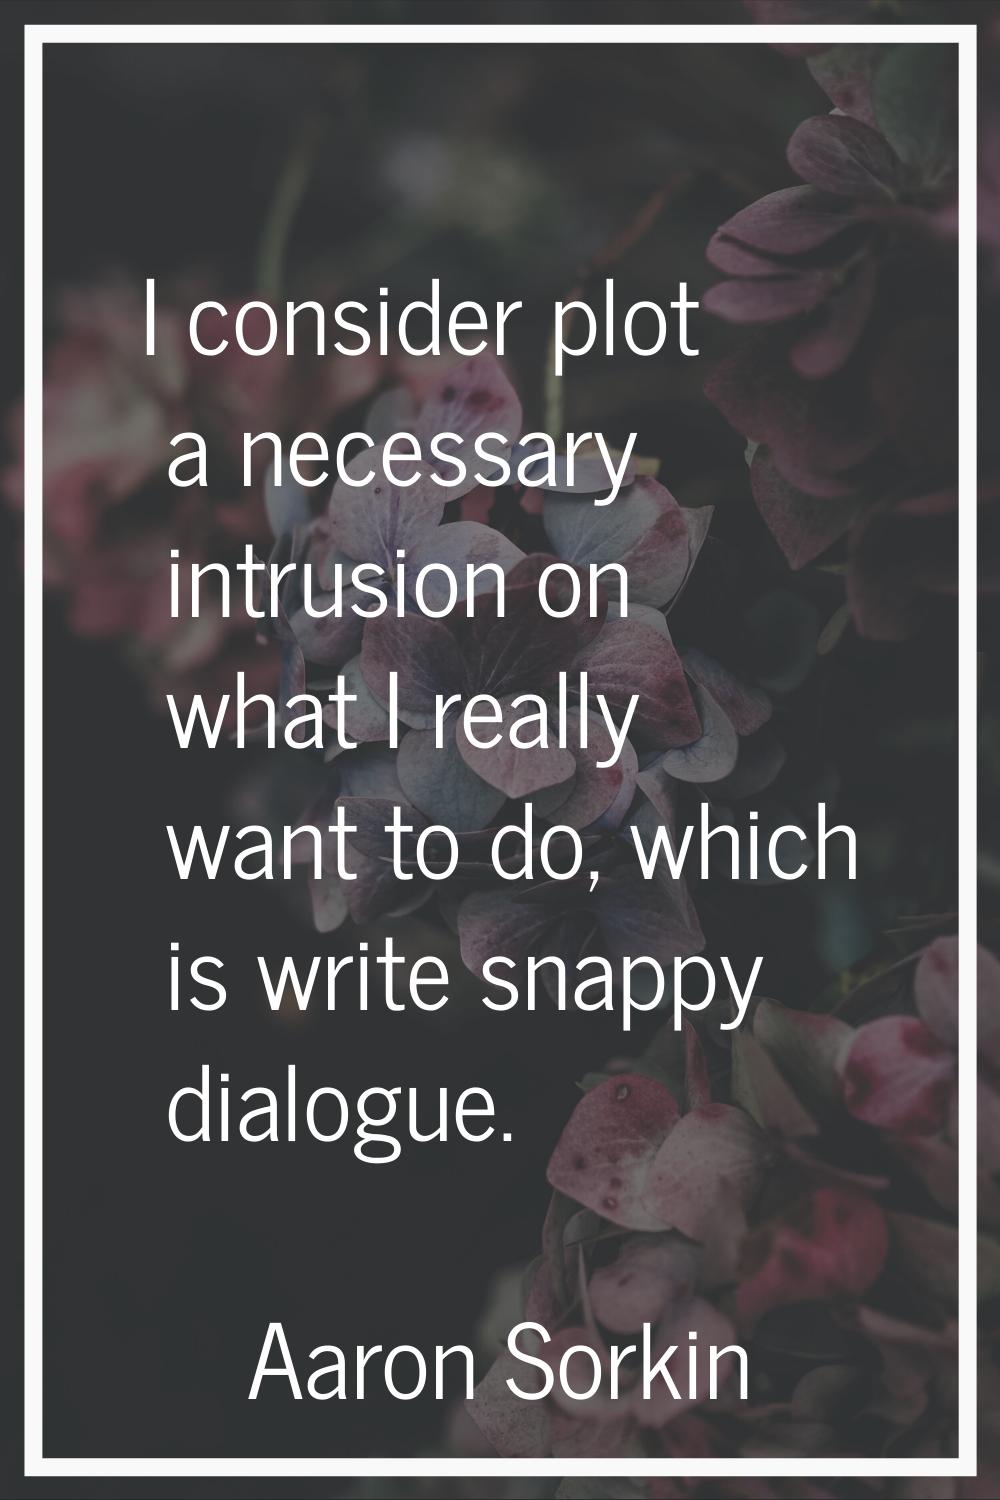 I consider plot a necessary intrusion on what I really want to do, which is write snappy dialogue.